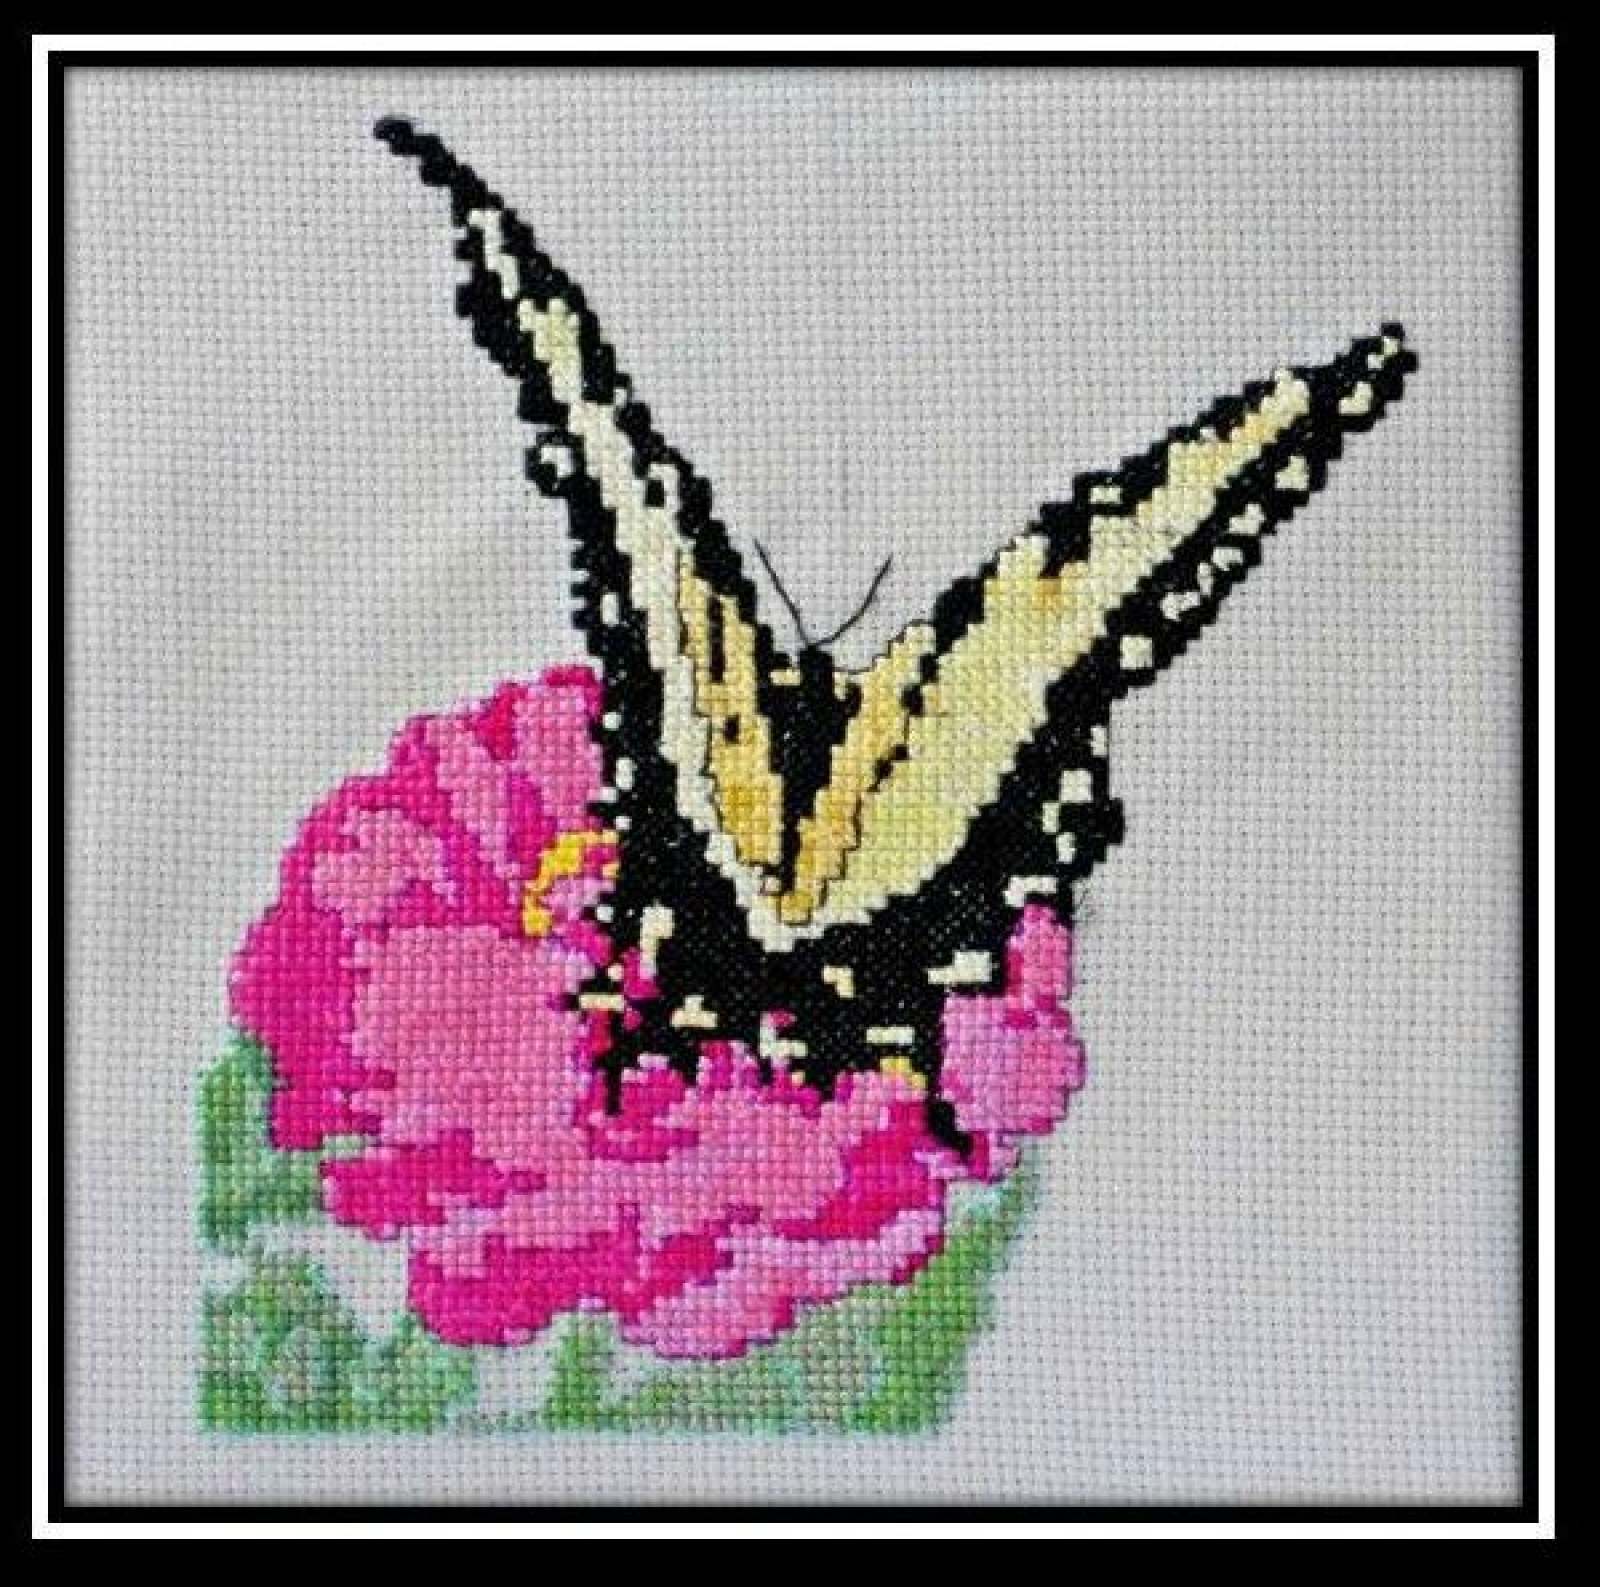 Counted Cross Stitch Patterns Shiny Flowers and Butterfly Printable Chart PDF Format Needlework Embroidery Crafts DIY DMC color